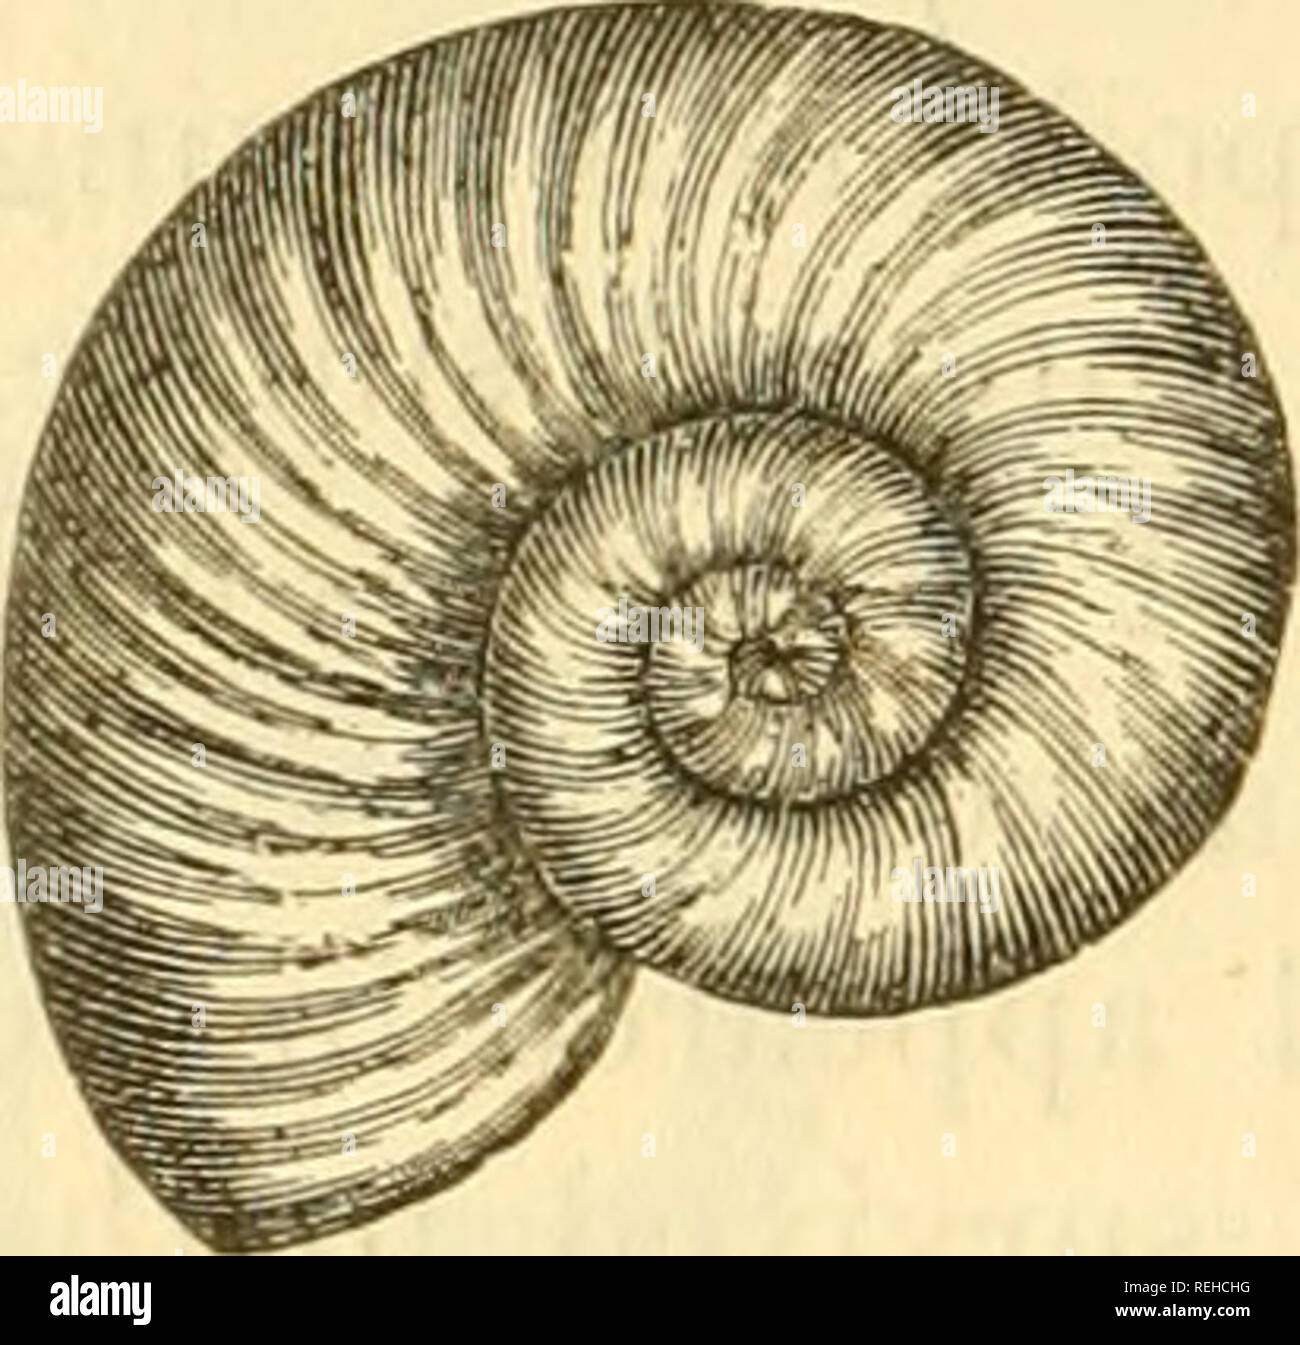 . College collection of palaeontology. 108 MOLLUSCA. No. 345. [574, CastJ. Nautilus pseudo-elegans, d'Orb. This tiue specimeu is an inner cast, and shows the septa of the shell. From the Chalk of Rouen, France, and now in the Ward Col- lection, University of Rochester. Size. 6 X 5. No. 246. Nautilus semistriatus, d'Orb. This large specimen is from the Middle Lias, Charmouth, England. No. 247. [595, Cast]. Nautilus Maximus, Conrad. This species is more loosely coiled than any of the preceding. The umbili- cus is wide and deep, and the chamber of habitation is verj' large. From the Hamilton Grou Stock Photo